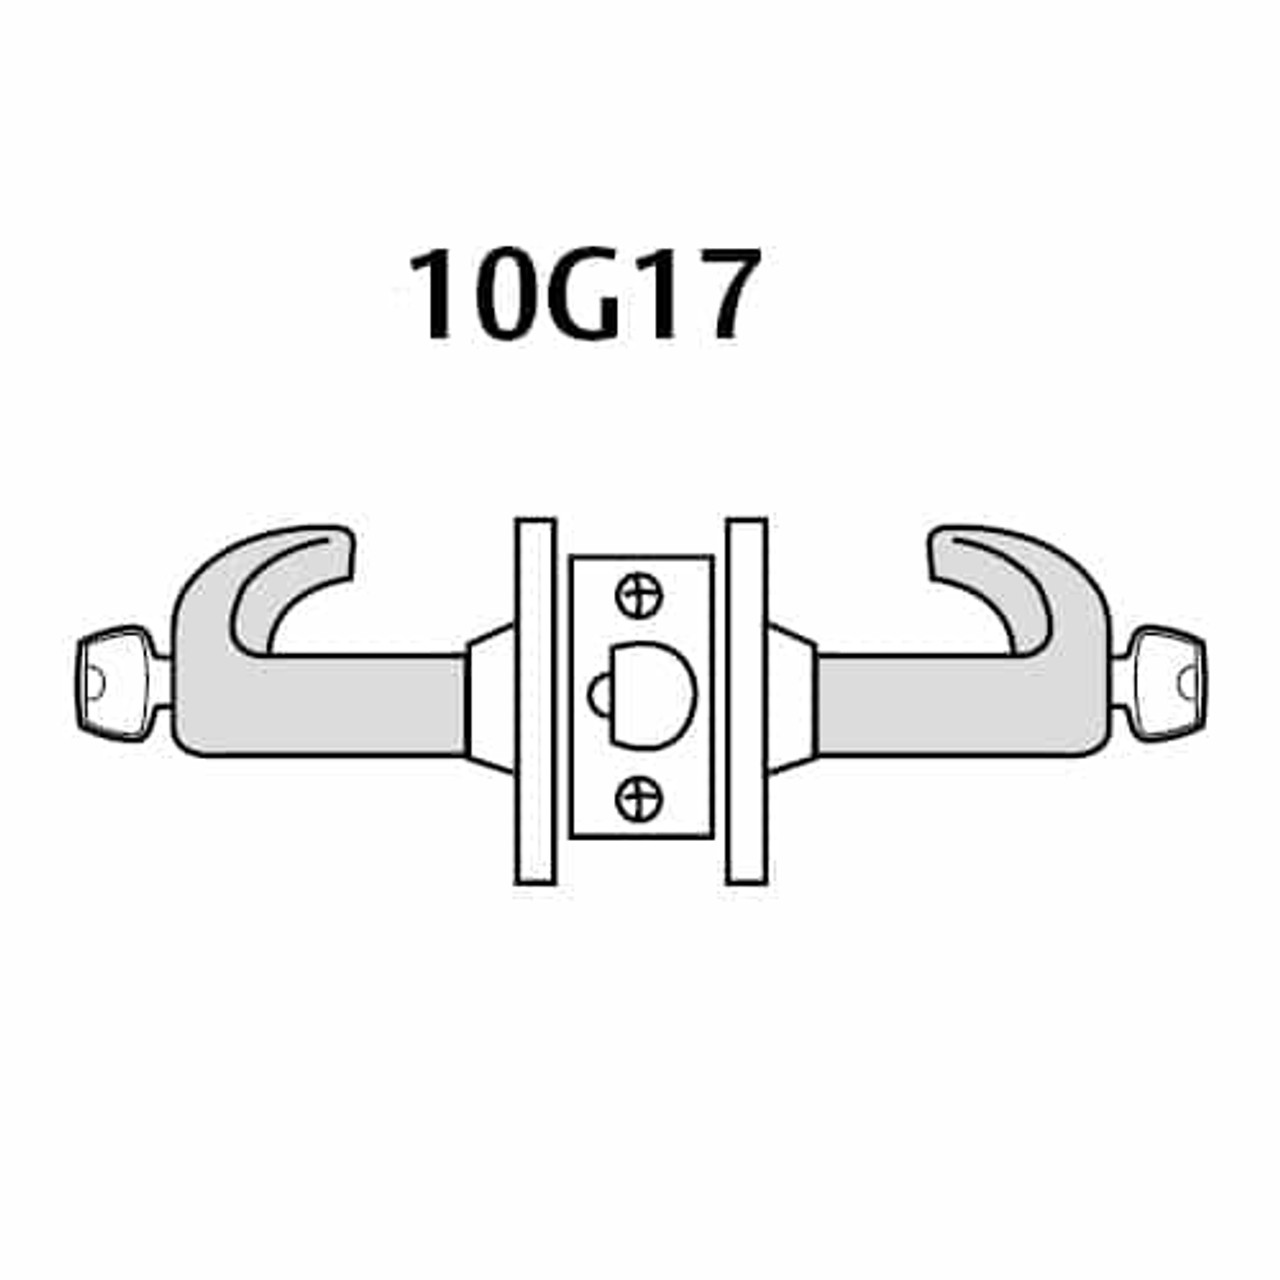 2860-10G17-GJ-26 Sargent 10 Line Cylindrical Institutional Locks with J Lever Design and G Rose Prepped for LFIC in Bright Chrome